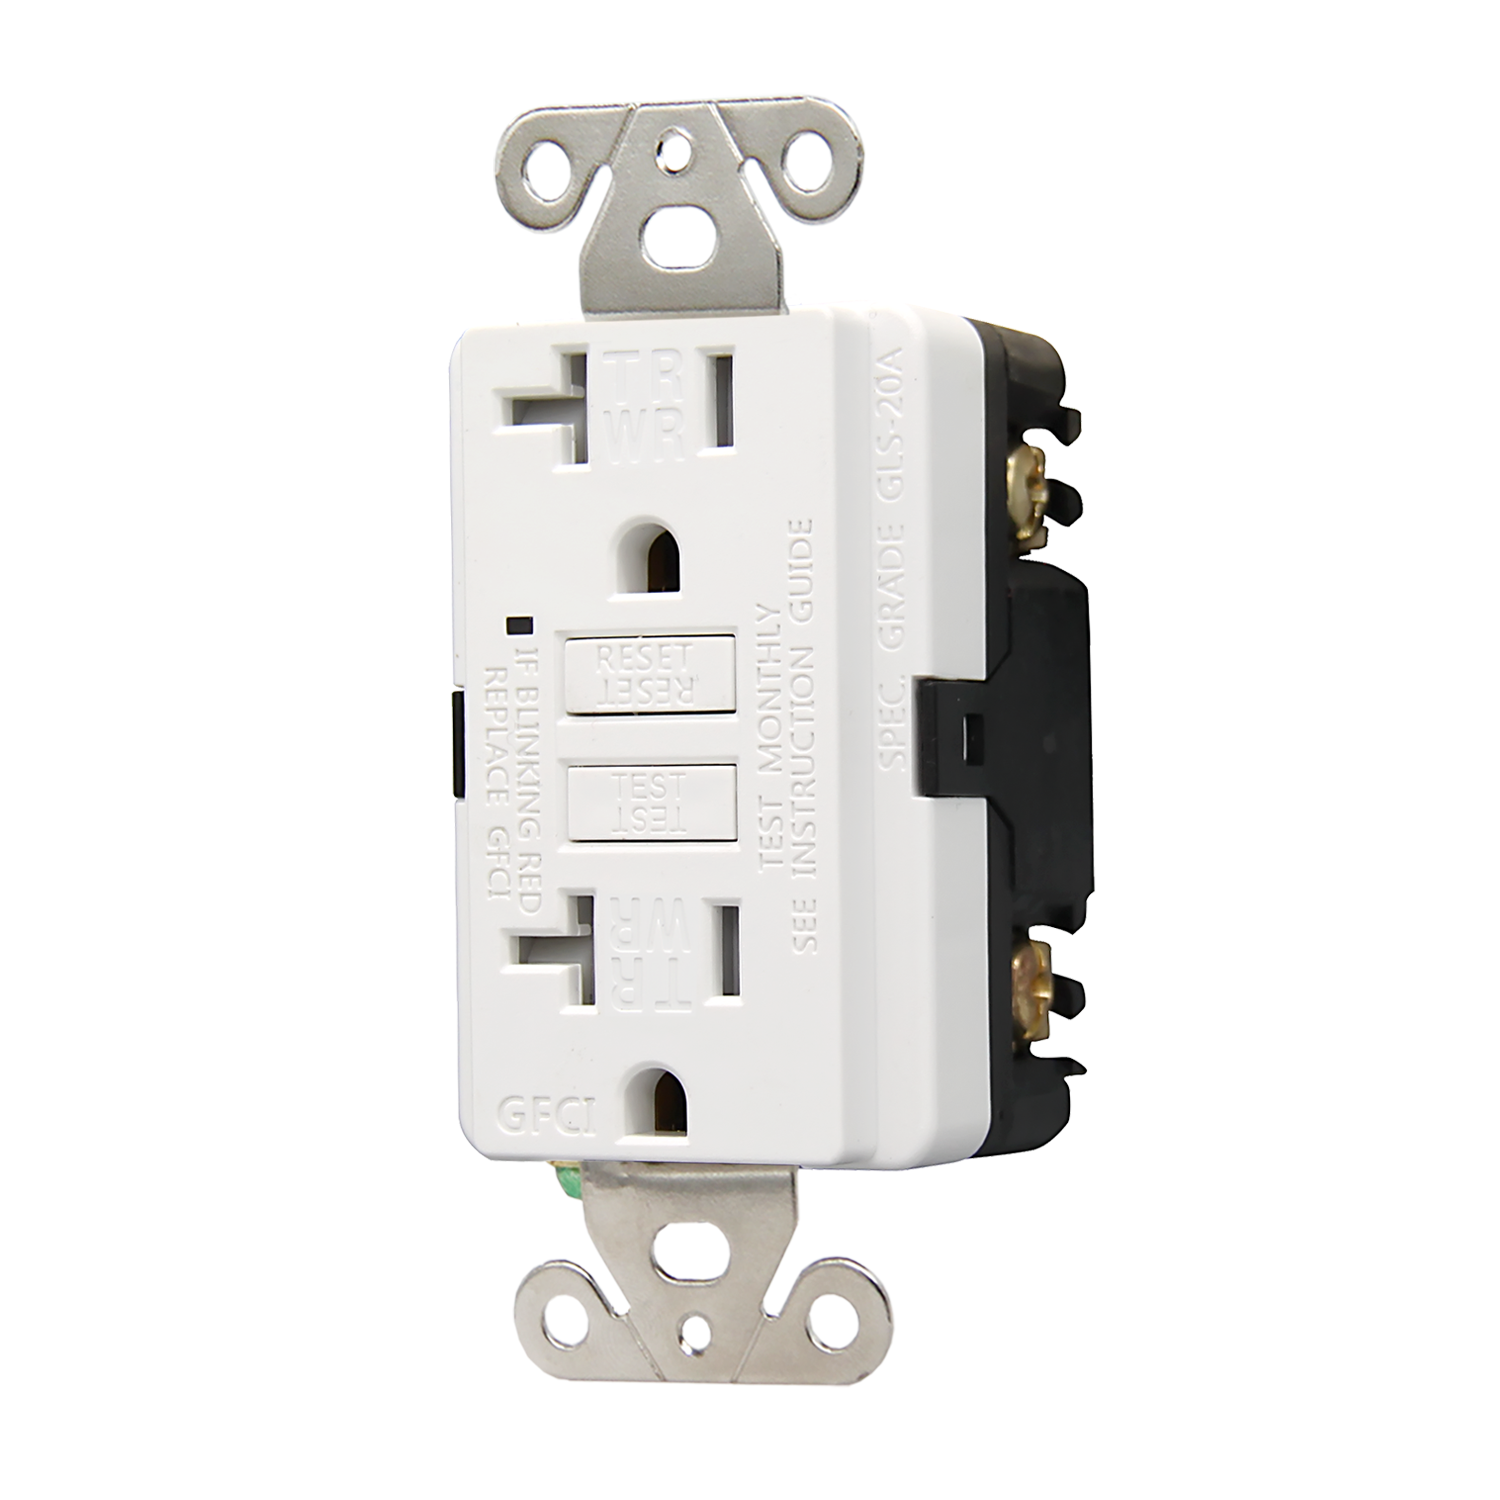 Faith GFCI Outlets GLS-20ATRWR 20Amp Self-Test Tamper And Weather-Resistant Duplex GFCI Outlet Indoor Or Outdoor Use